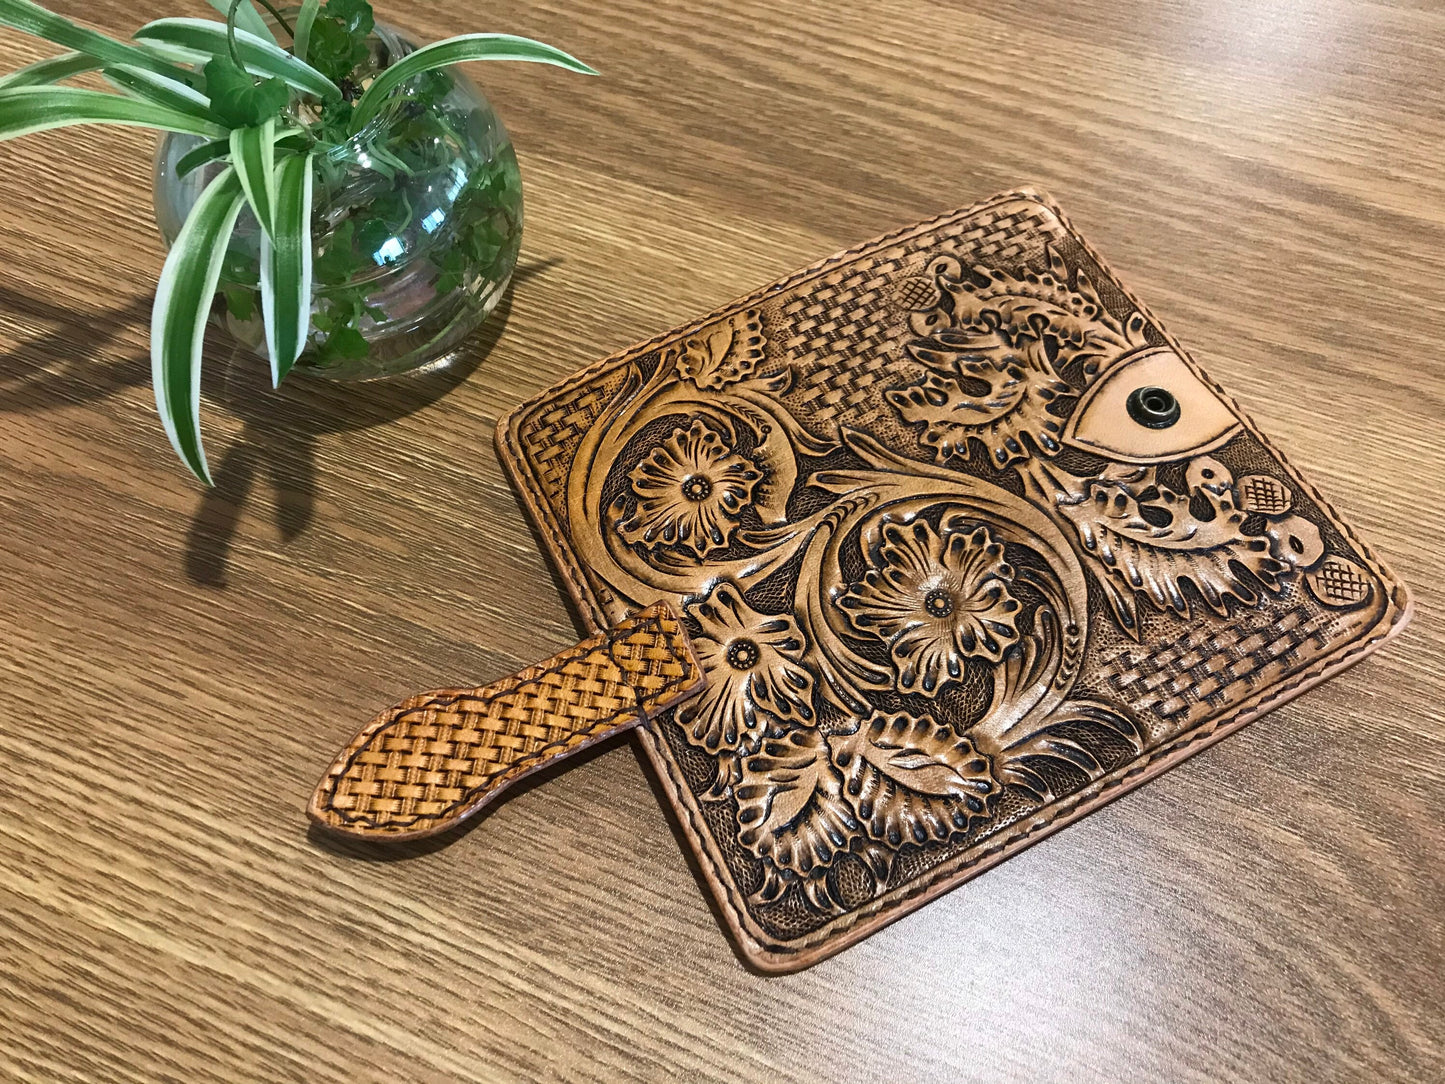 Hand tooled phone wallet - Sheridan flowers and leaves